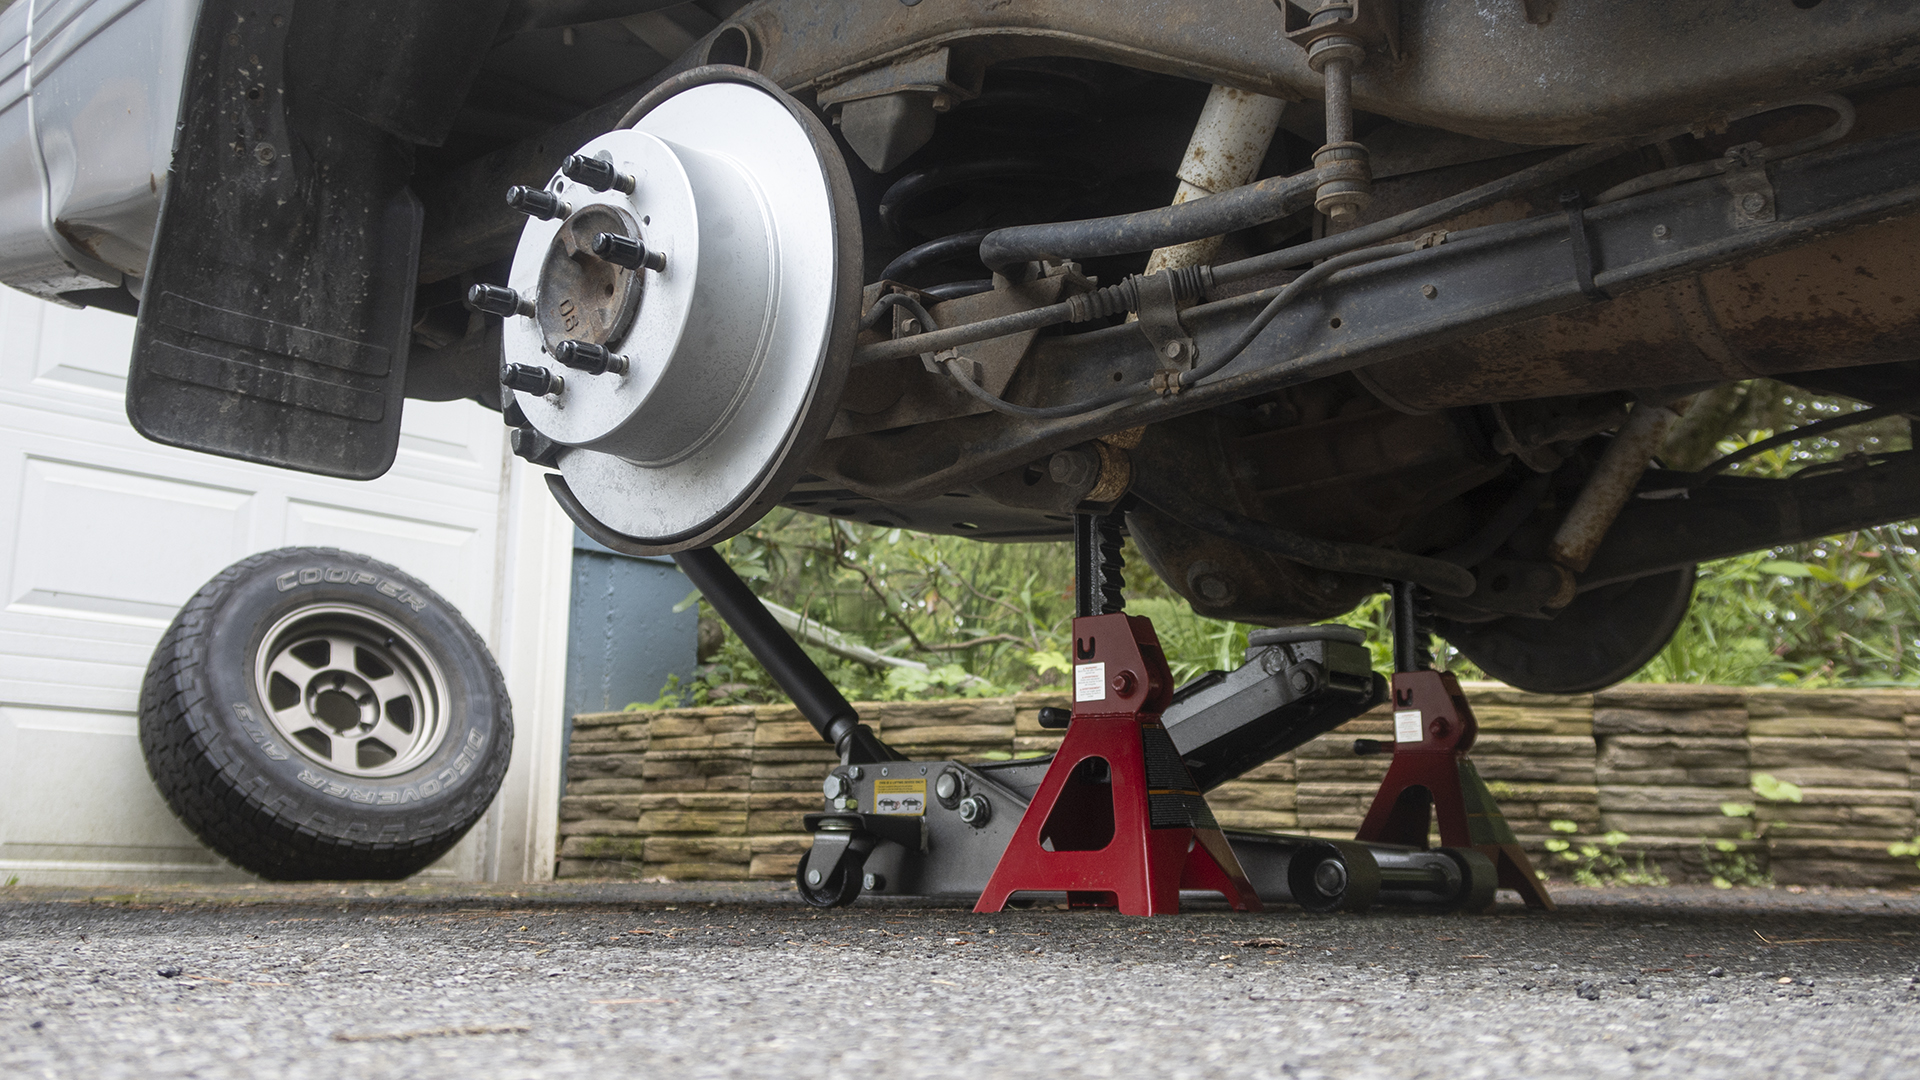 An SUV being supported by jack stands under the rear axle.